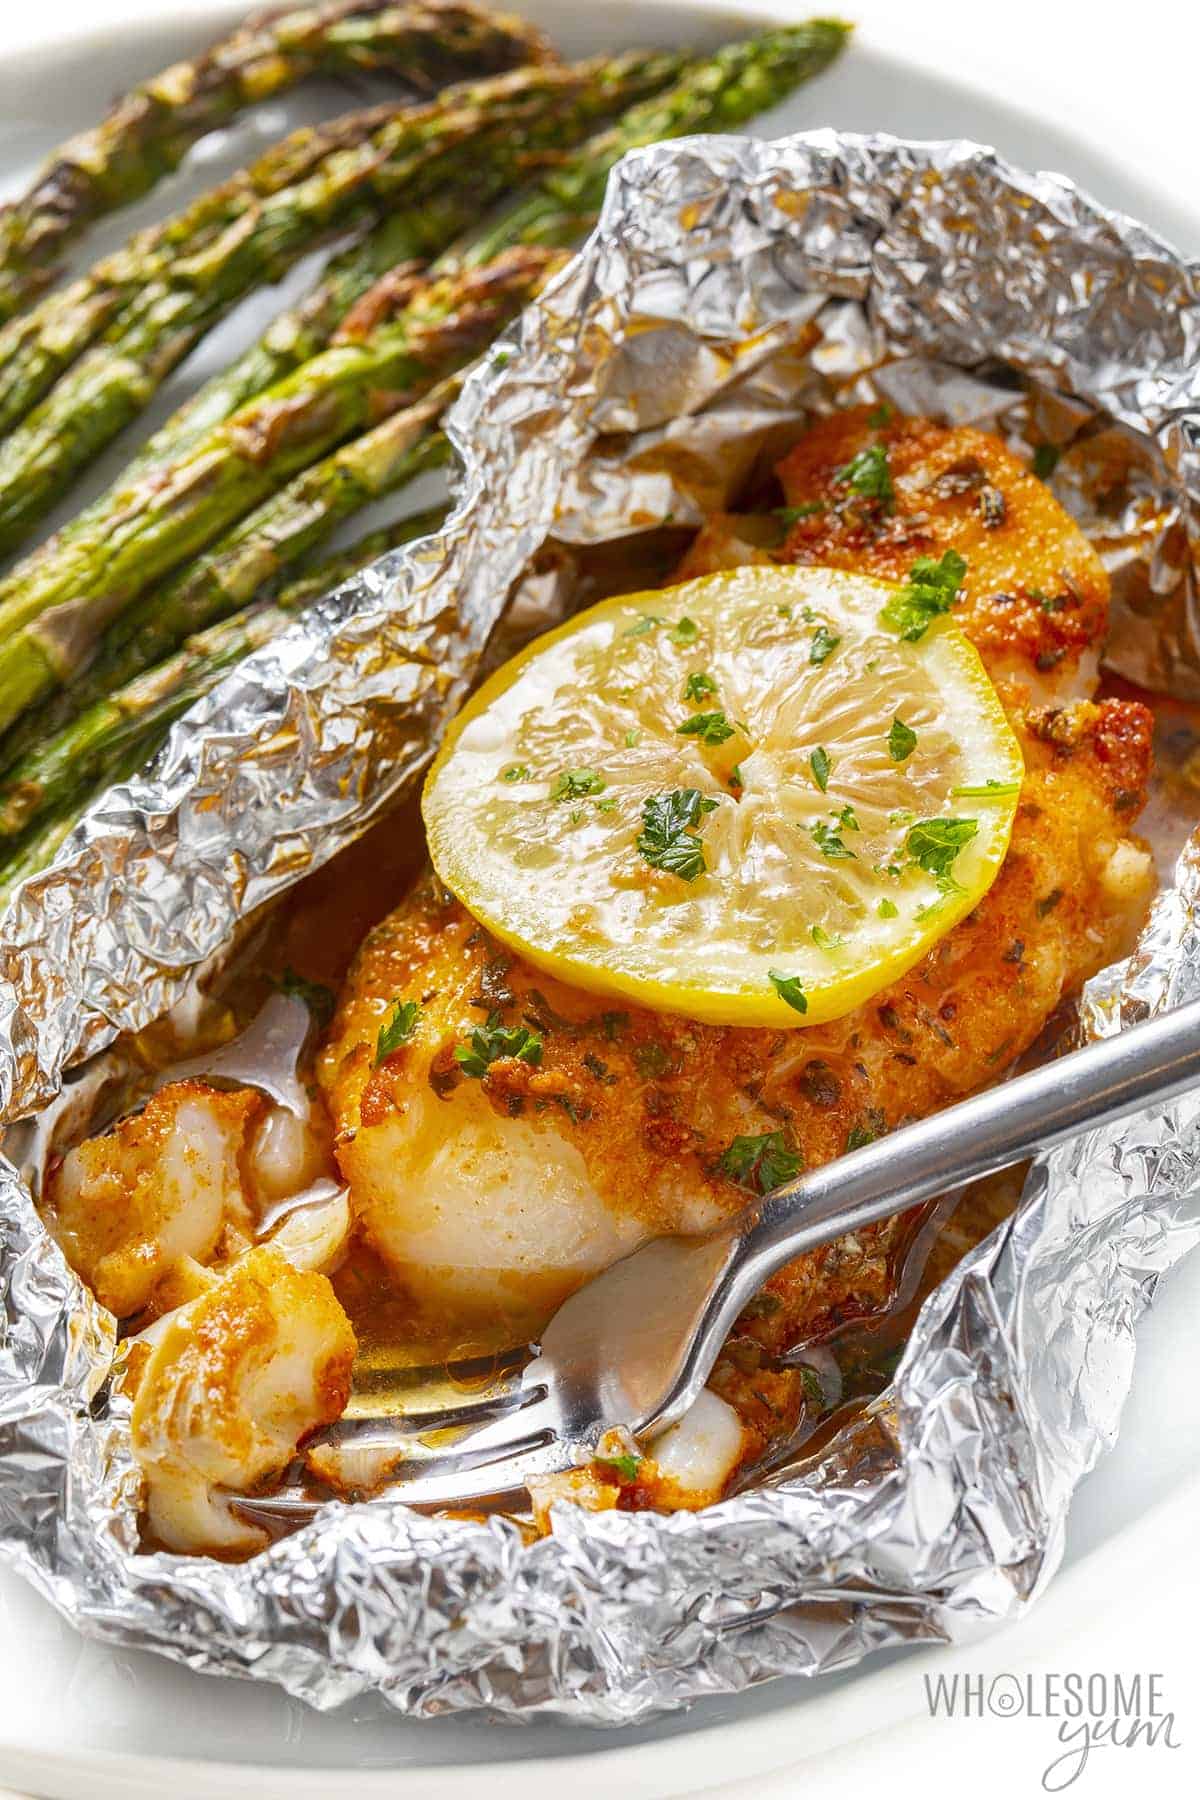 Grilled cod in foil on a plate with asparagus.